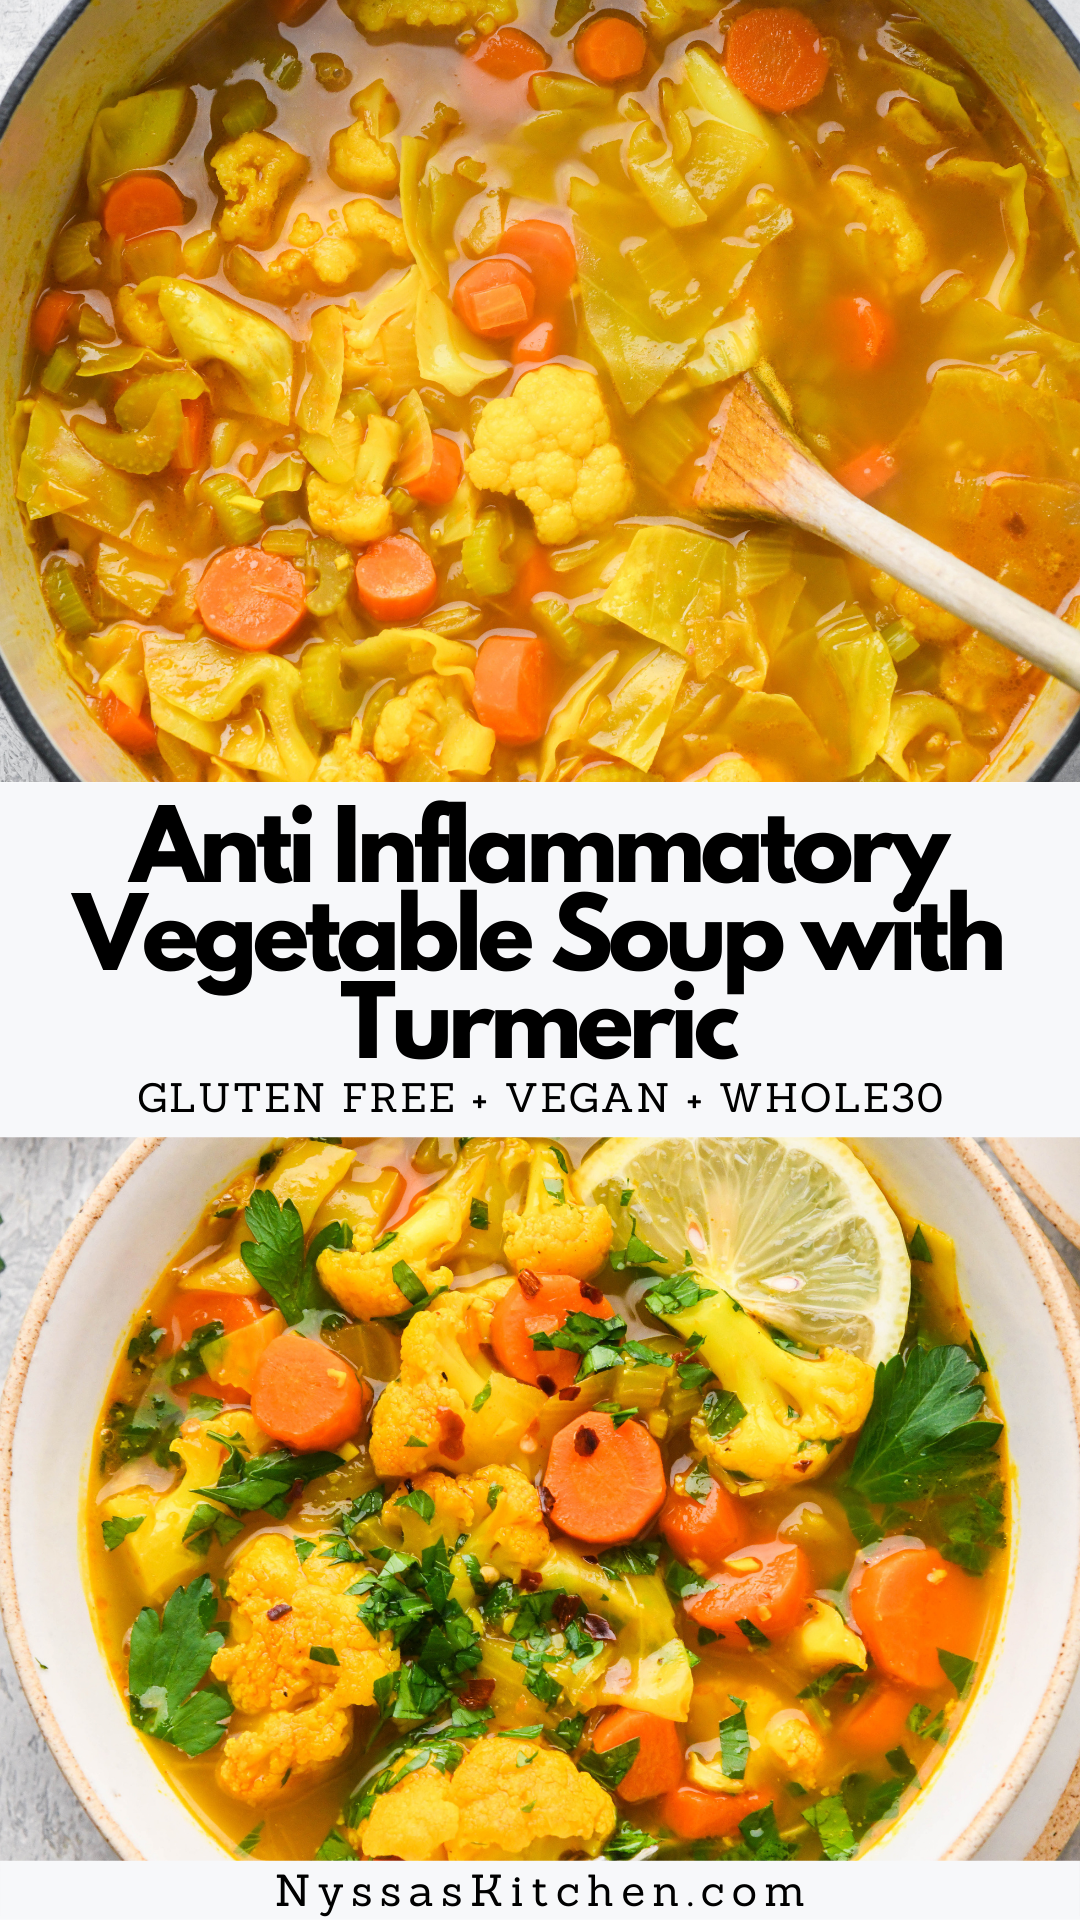 Warm up with this anti inflammatory vegetable soup with turmeric! Made with nutrient dense ingredients like olive oil, onions, carrots, celery, cabbage, cauliflower, turmeric, and vegetable broth, this healthy soup will keep you feeling your best all winter long. Vegan, gluten free, paleo, and Whole30 compatible.